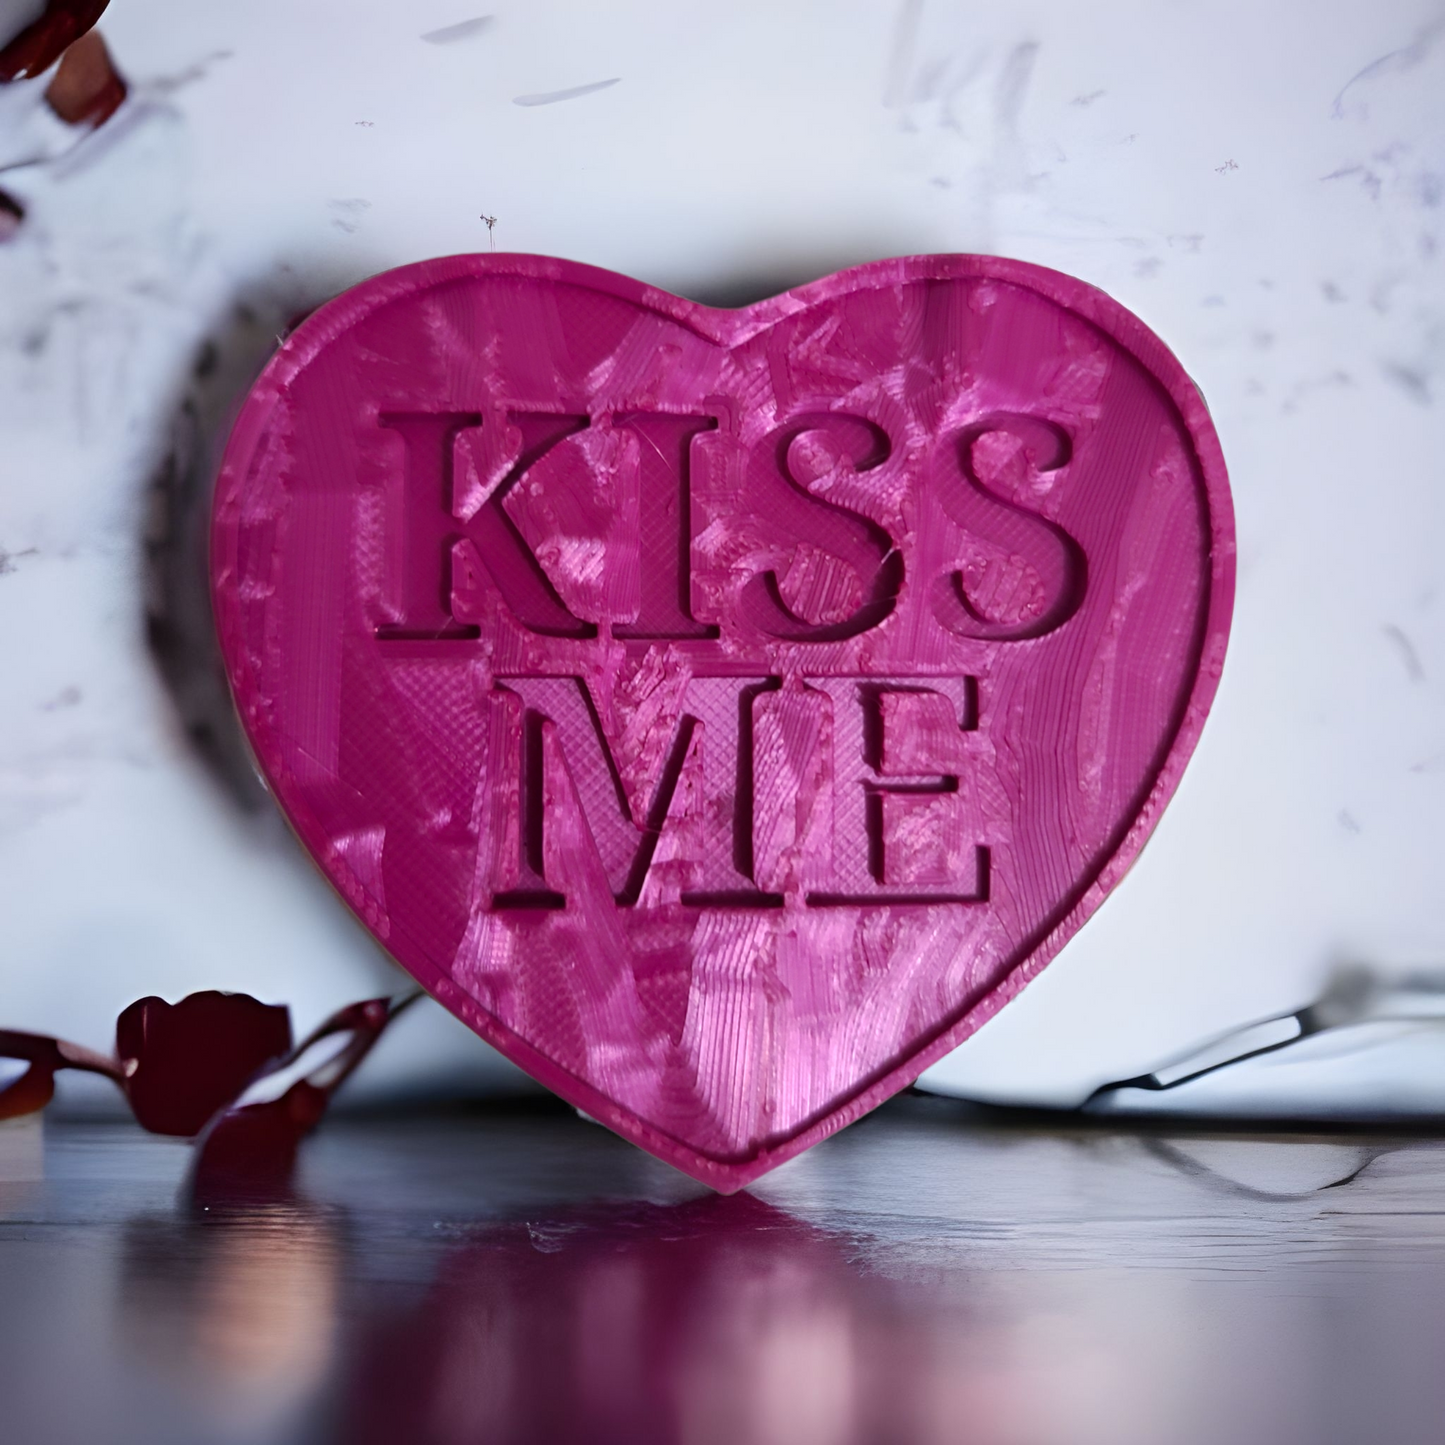 3d print, Conversation heart, Valentines Day, party favor, magnet, Romantic Gift, love you, miss you, be mine, hug me, kiss me, message